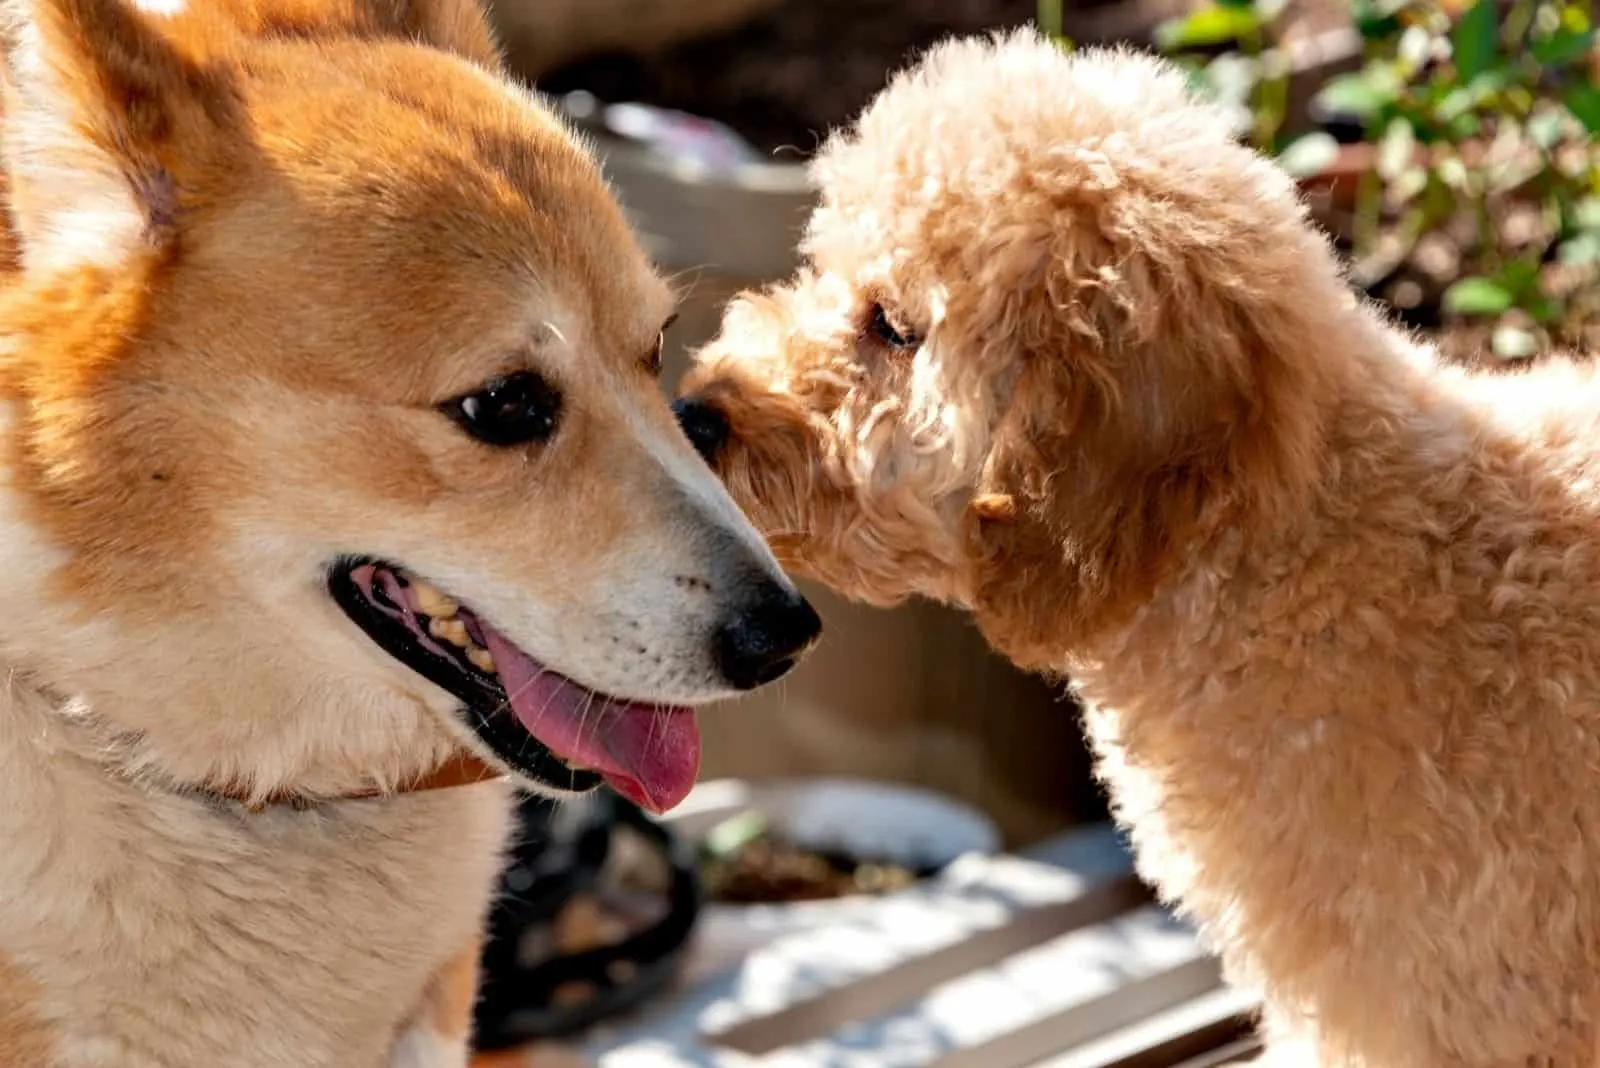 welsh corgi kissed by a toy poodle in their first contact in the garden